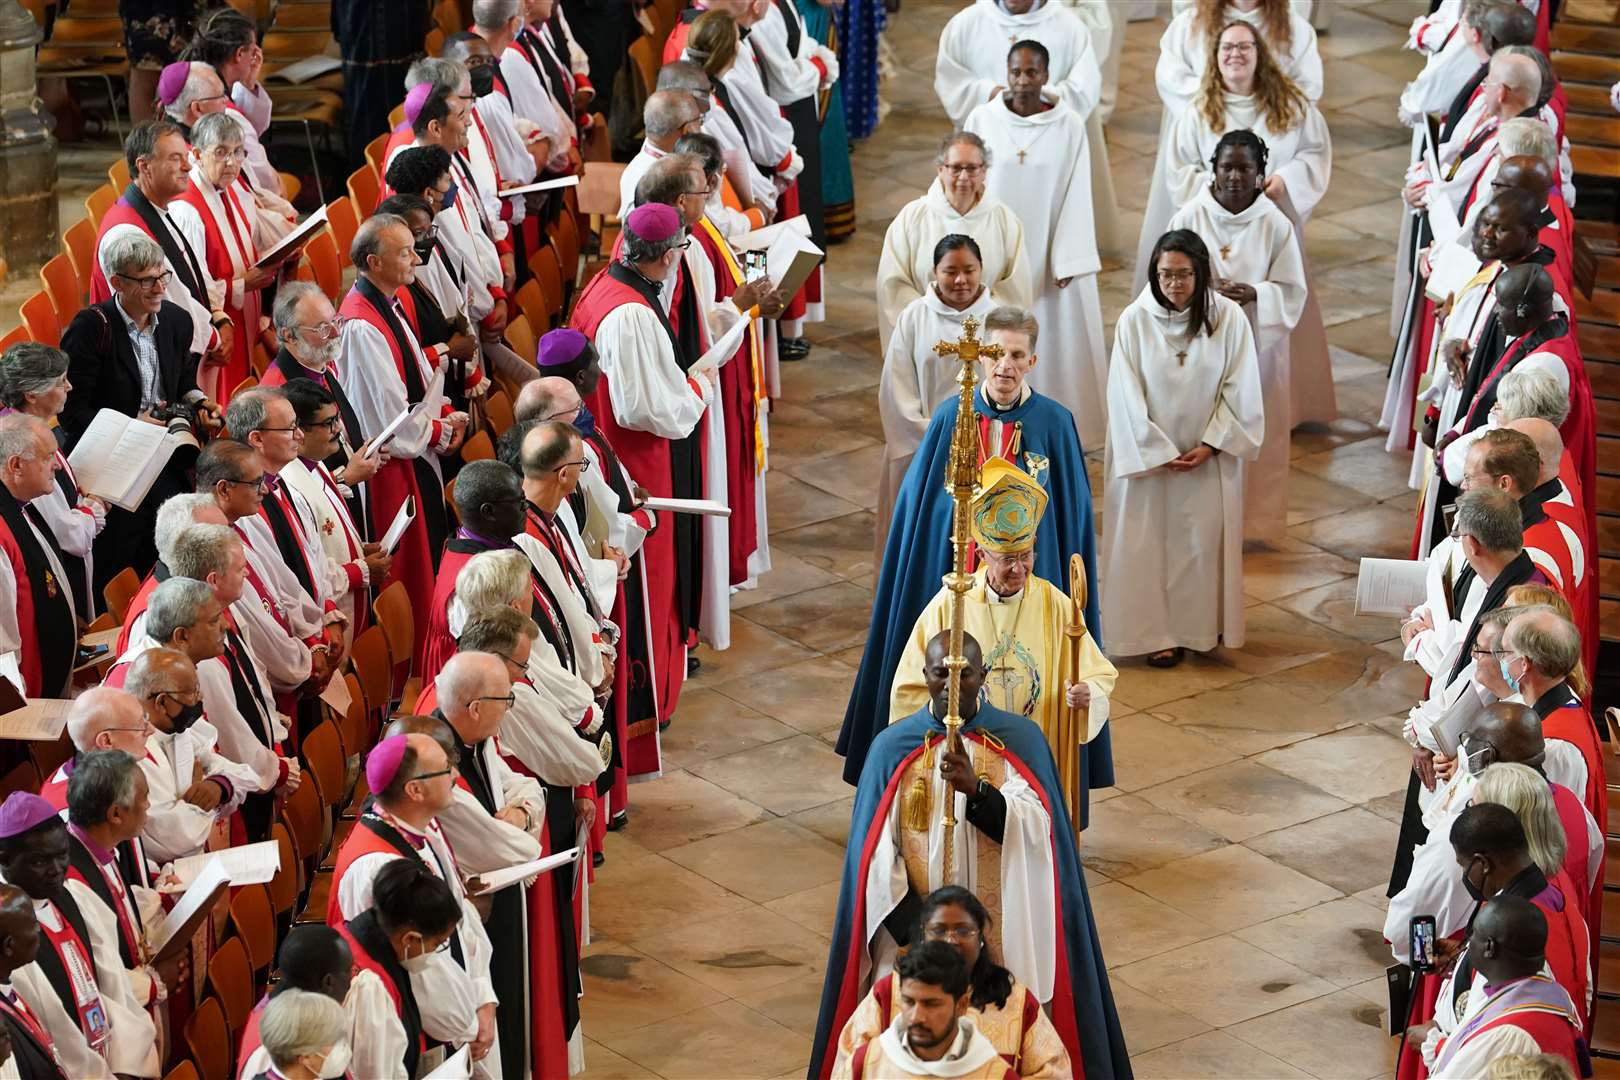 More than 600 Anglican bishops from across the world are meeting at the Lambeth Conference (Gareth Fuller/PA)